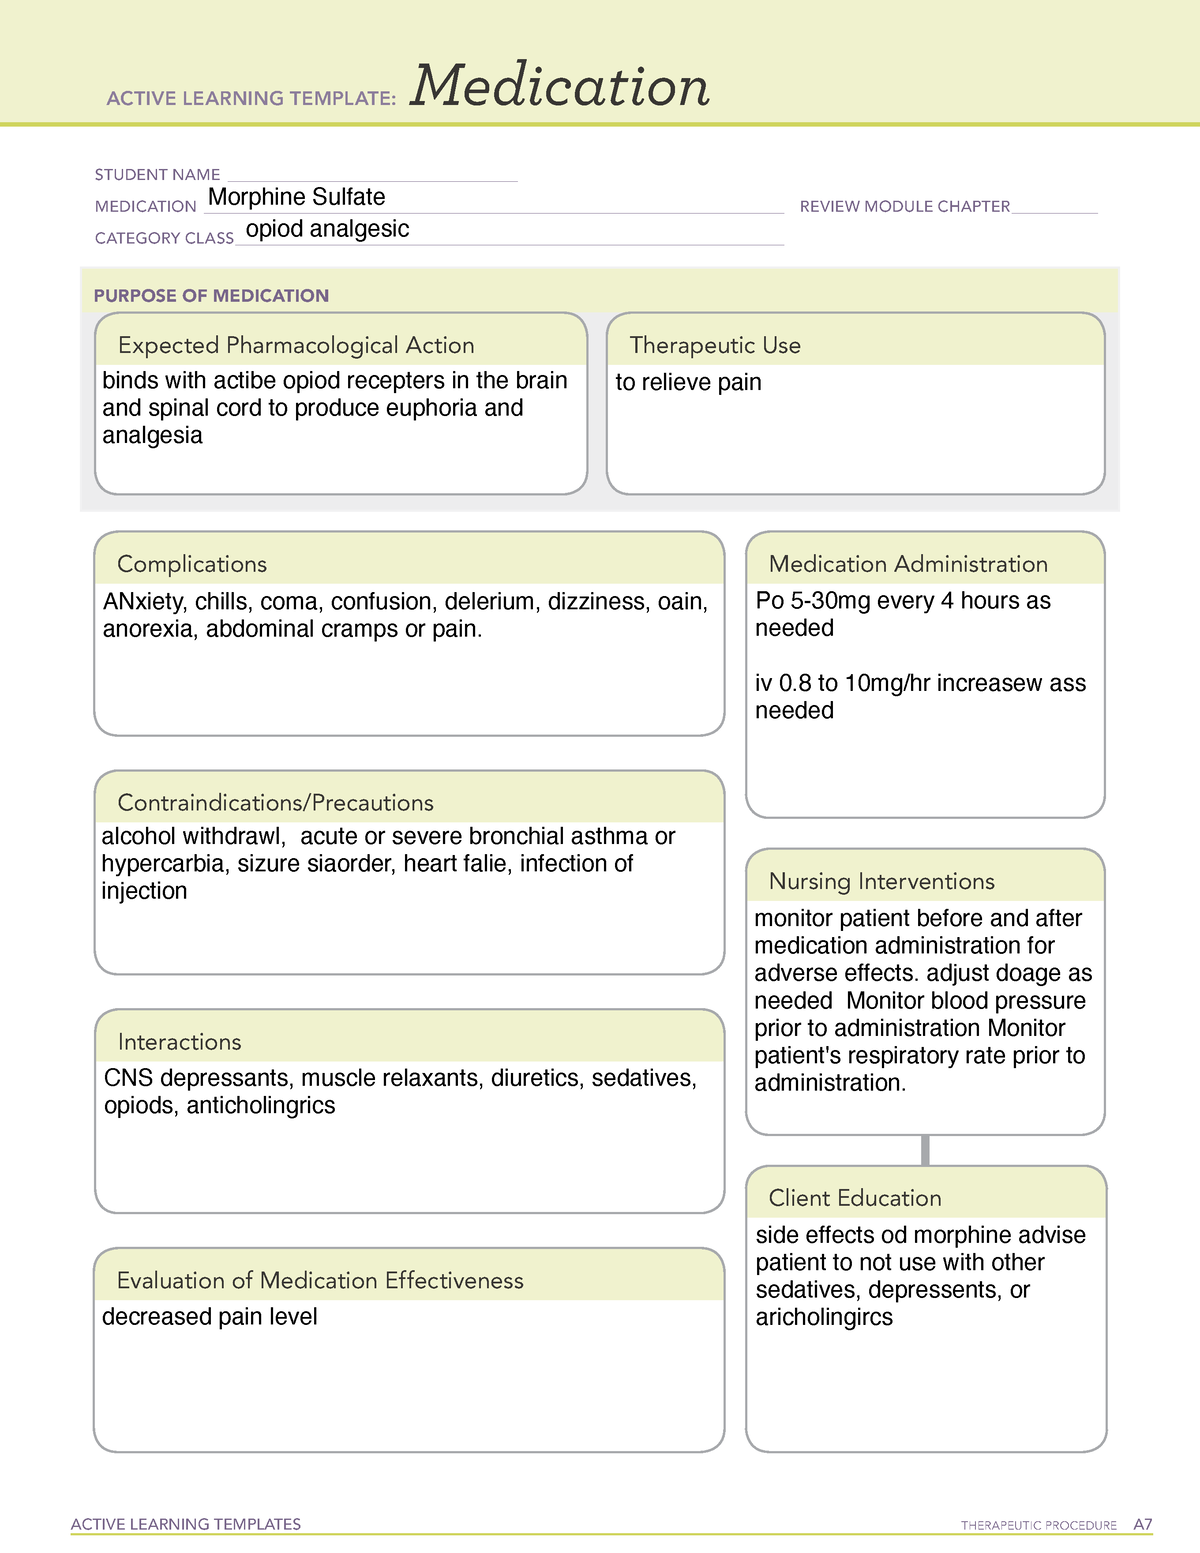 morphine-sulfate-ati-template-active-learning-templates-therapeutic-procedure-a-medication